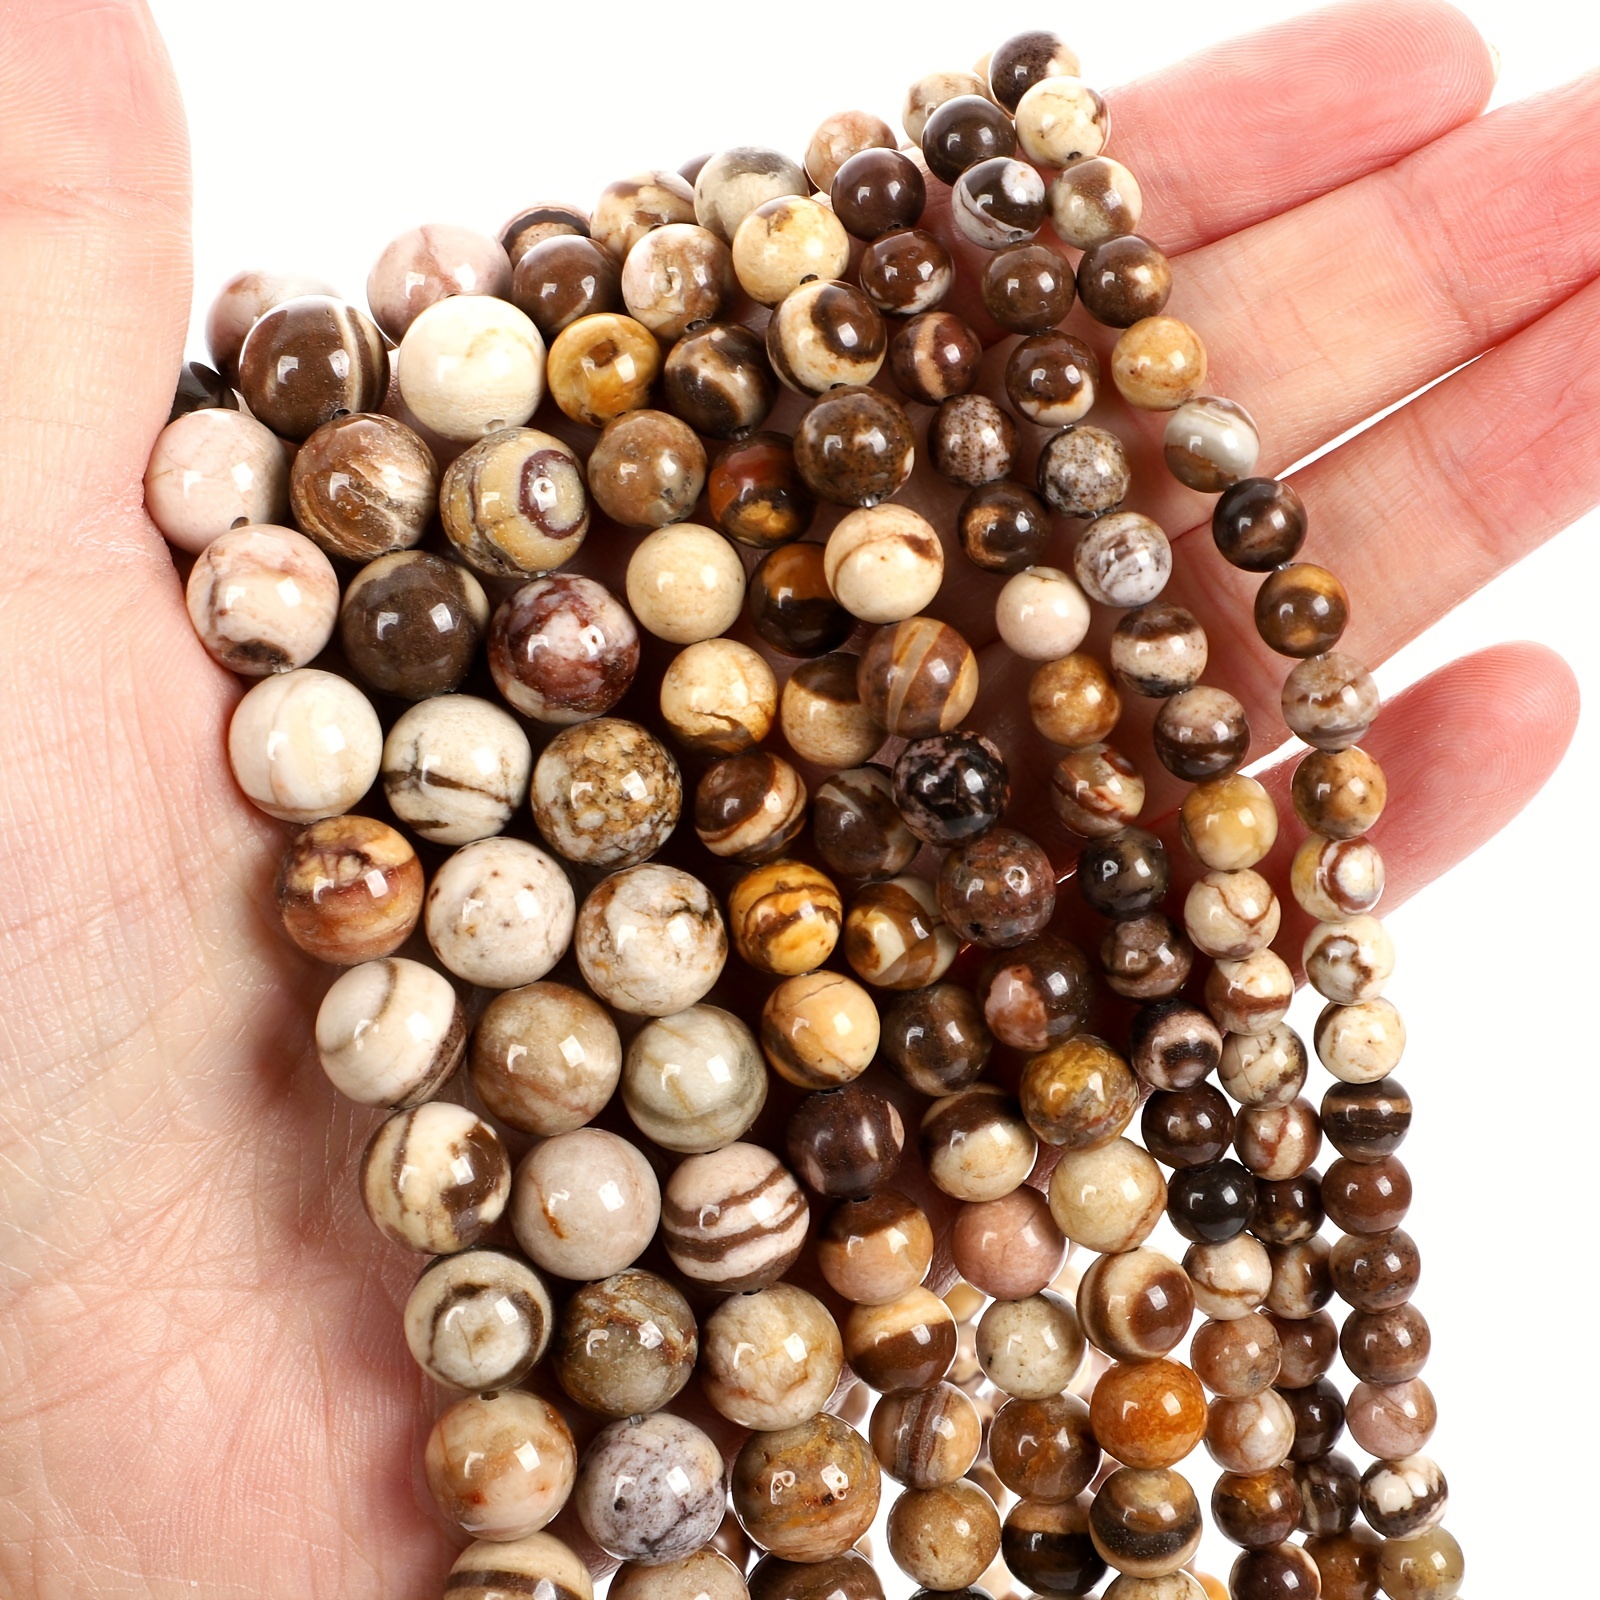 

Natural Stone Australia Agates Brown Charm Round Loose Beads For Jewelry Making Needlework Bracelet Diy Pick Size Strand 4-12 Mm